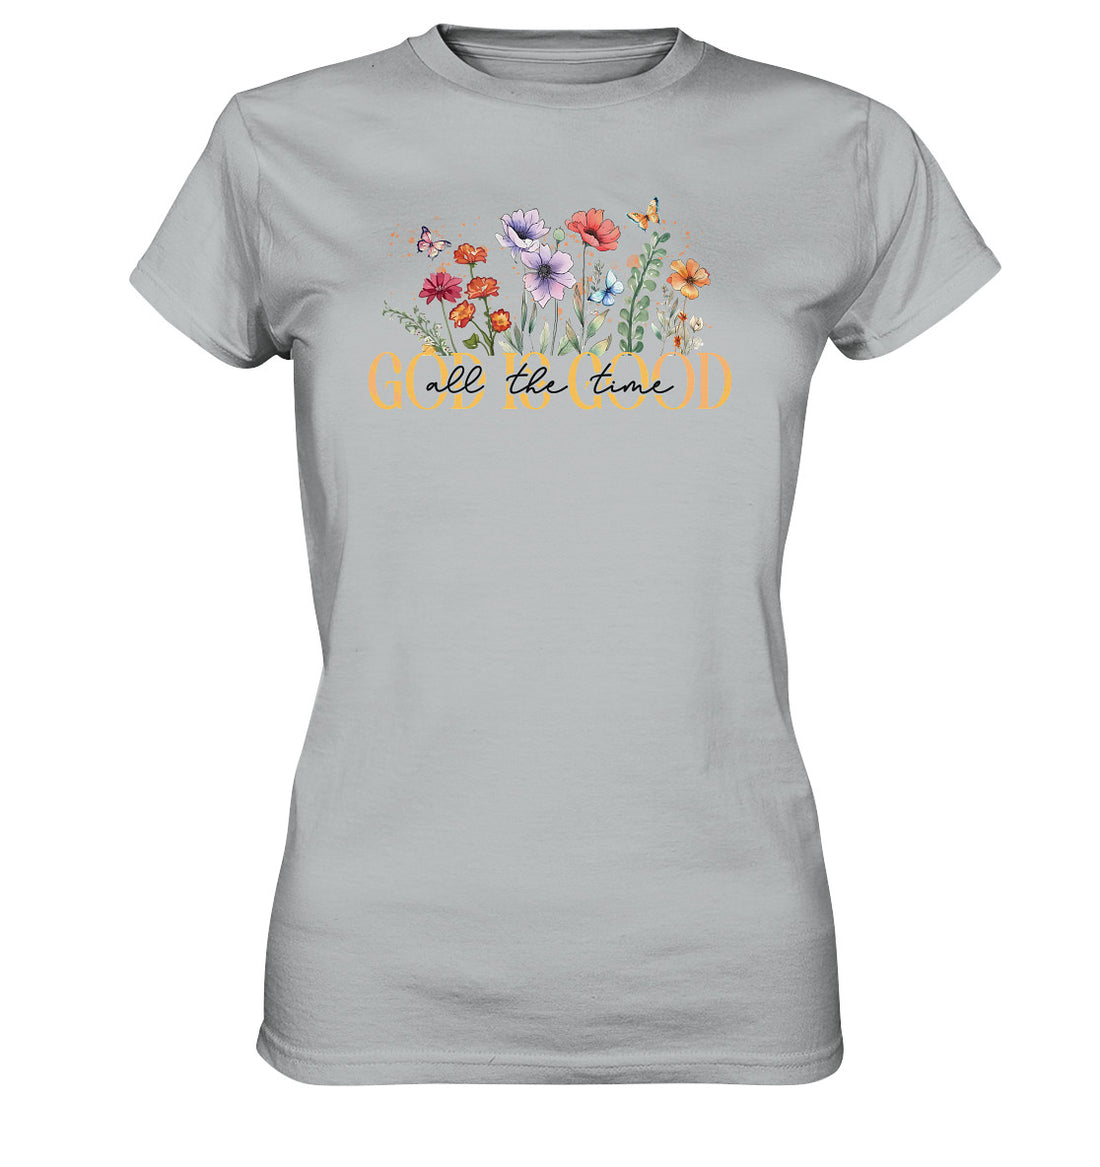 GOD IS GOOD all the time (2) - Ladies Premium Shirt